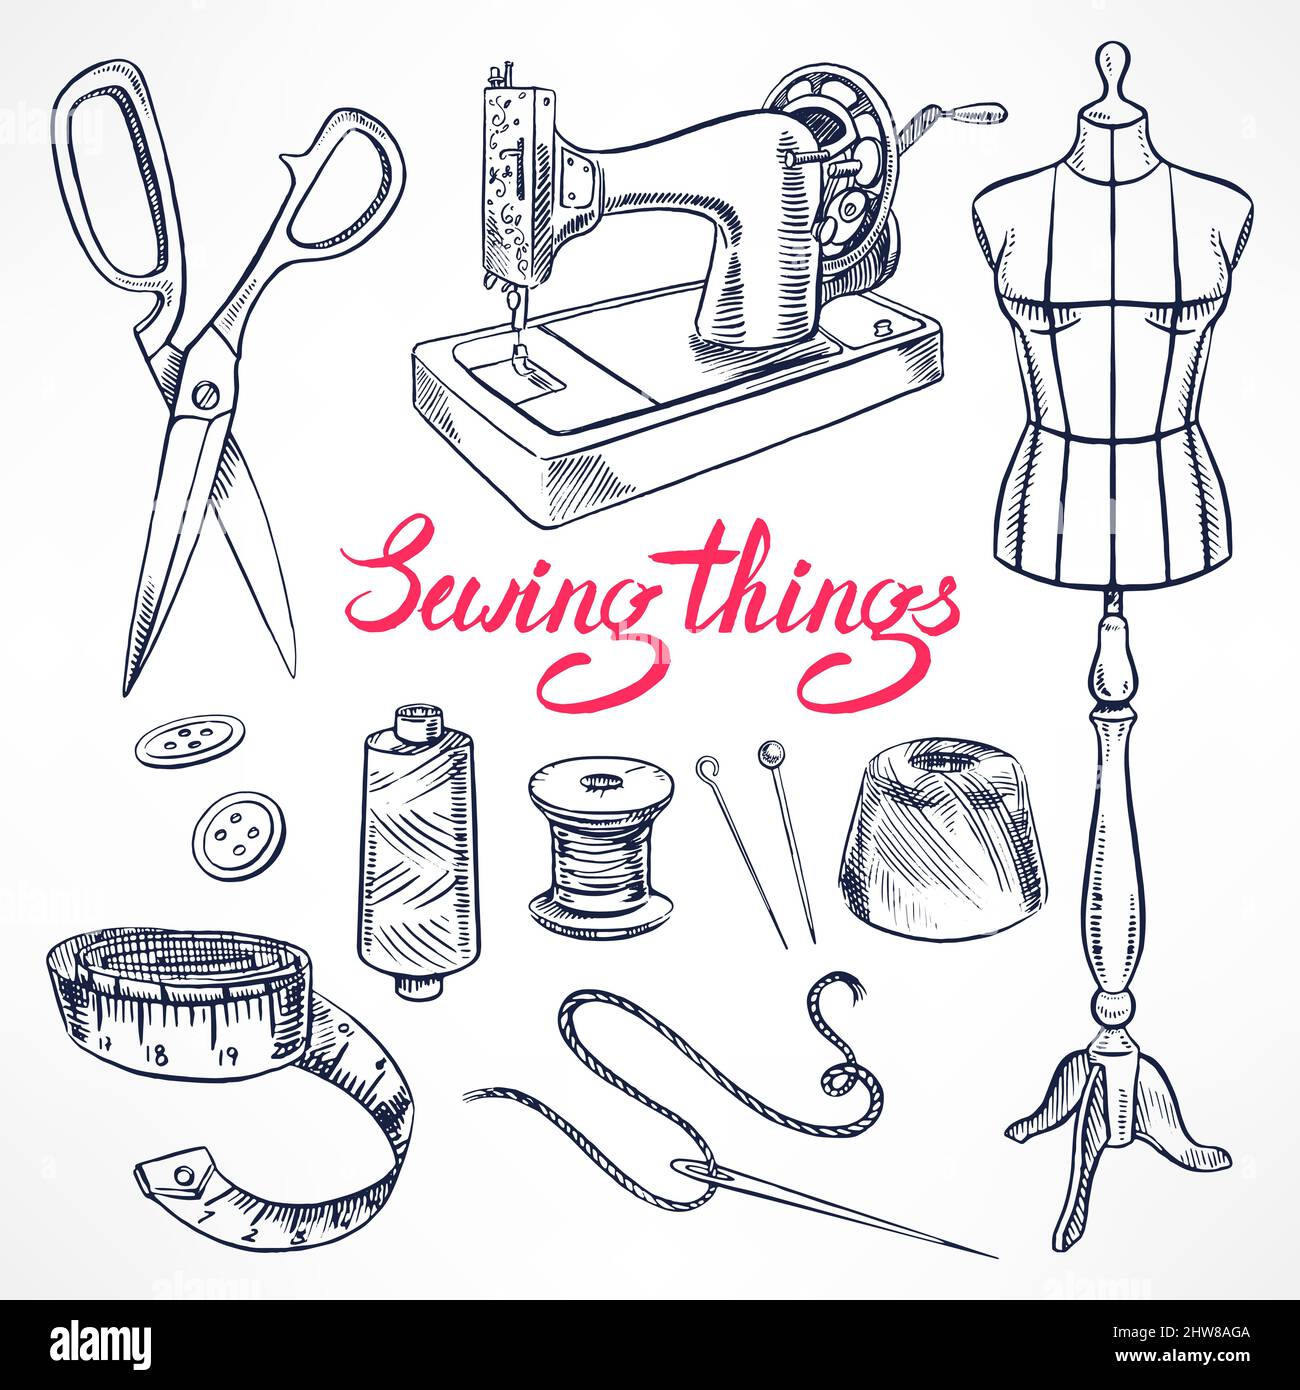 Set Of Sewing Accessories Drawings Stock Illustration - Download Image Now  - Drawing - Art Product, Coathanger, Sewing - iStock